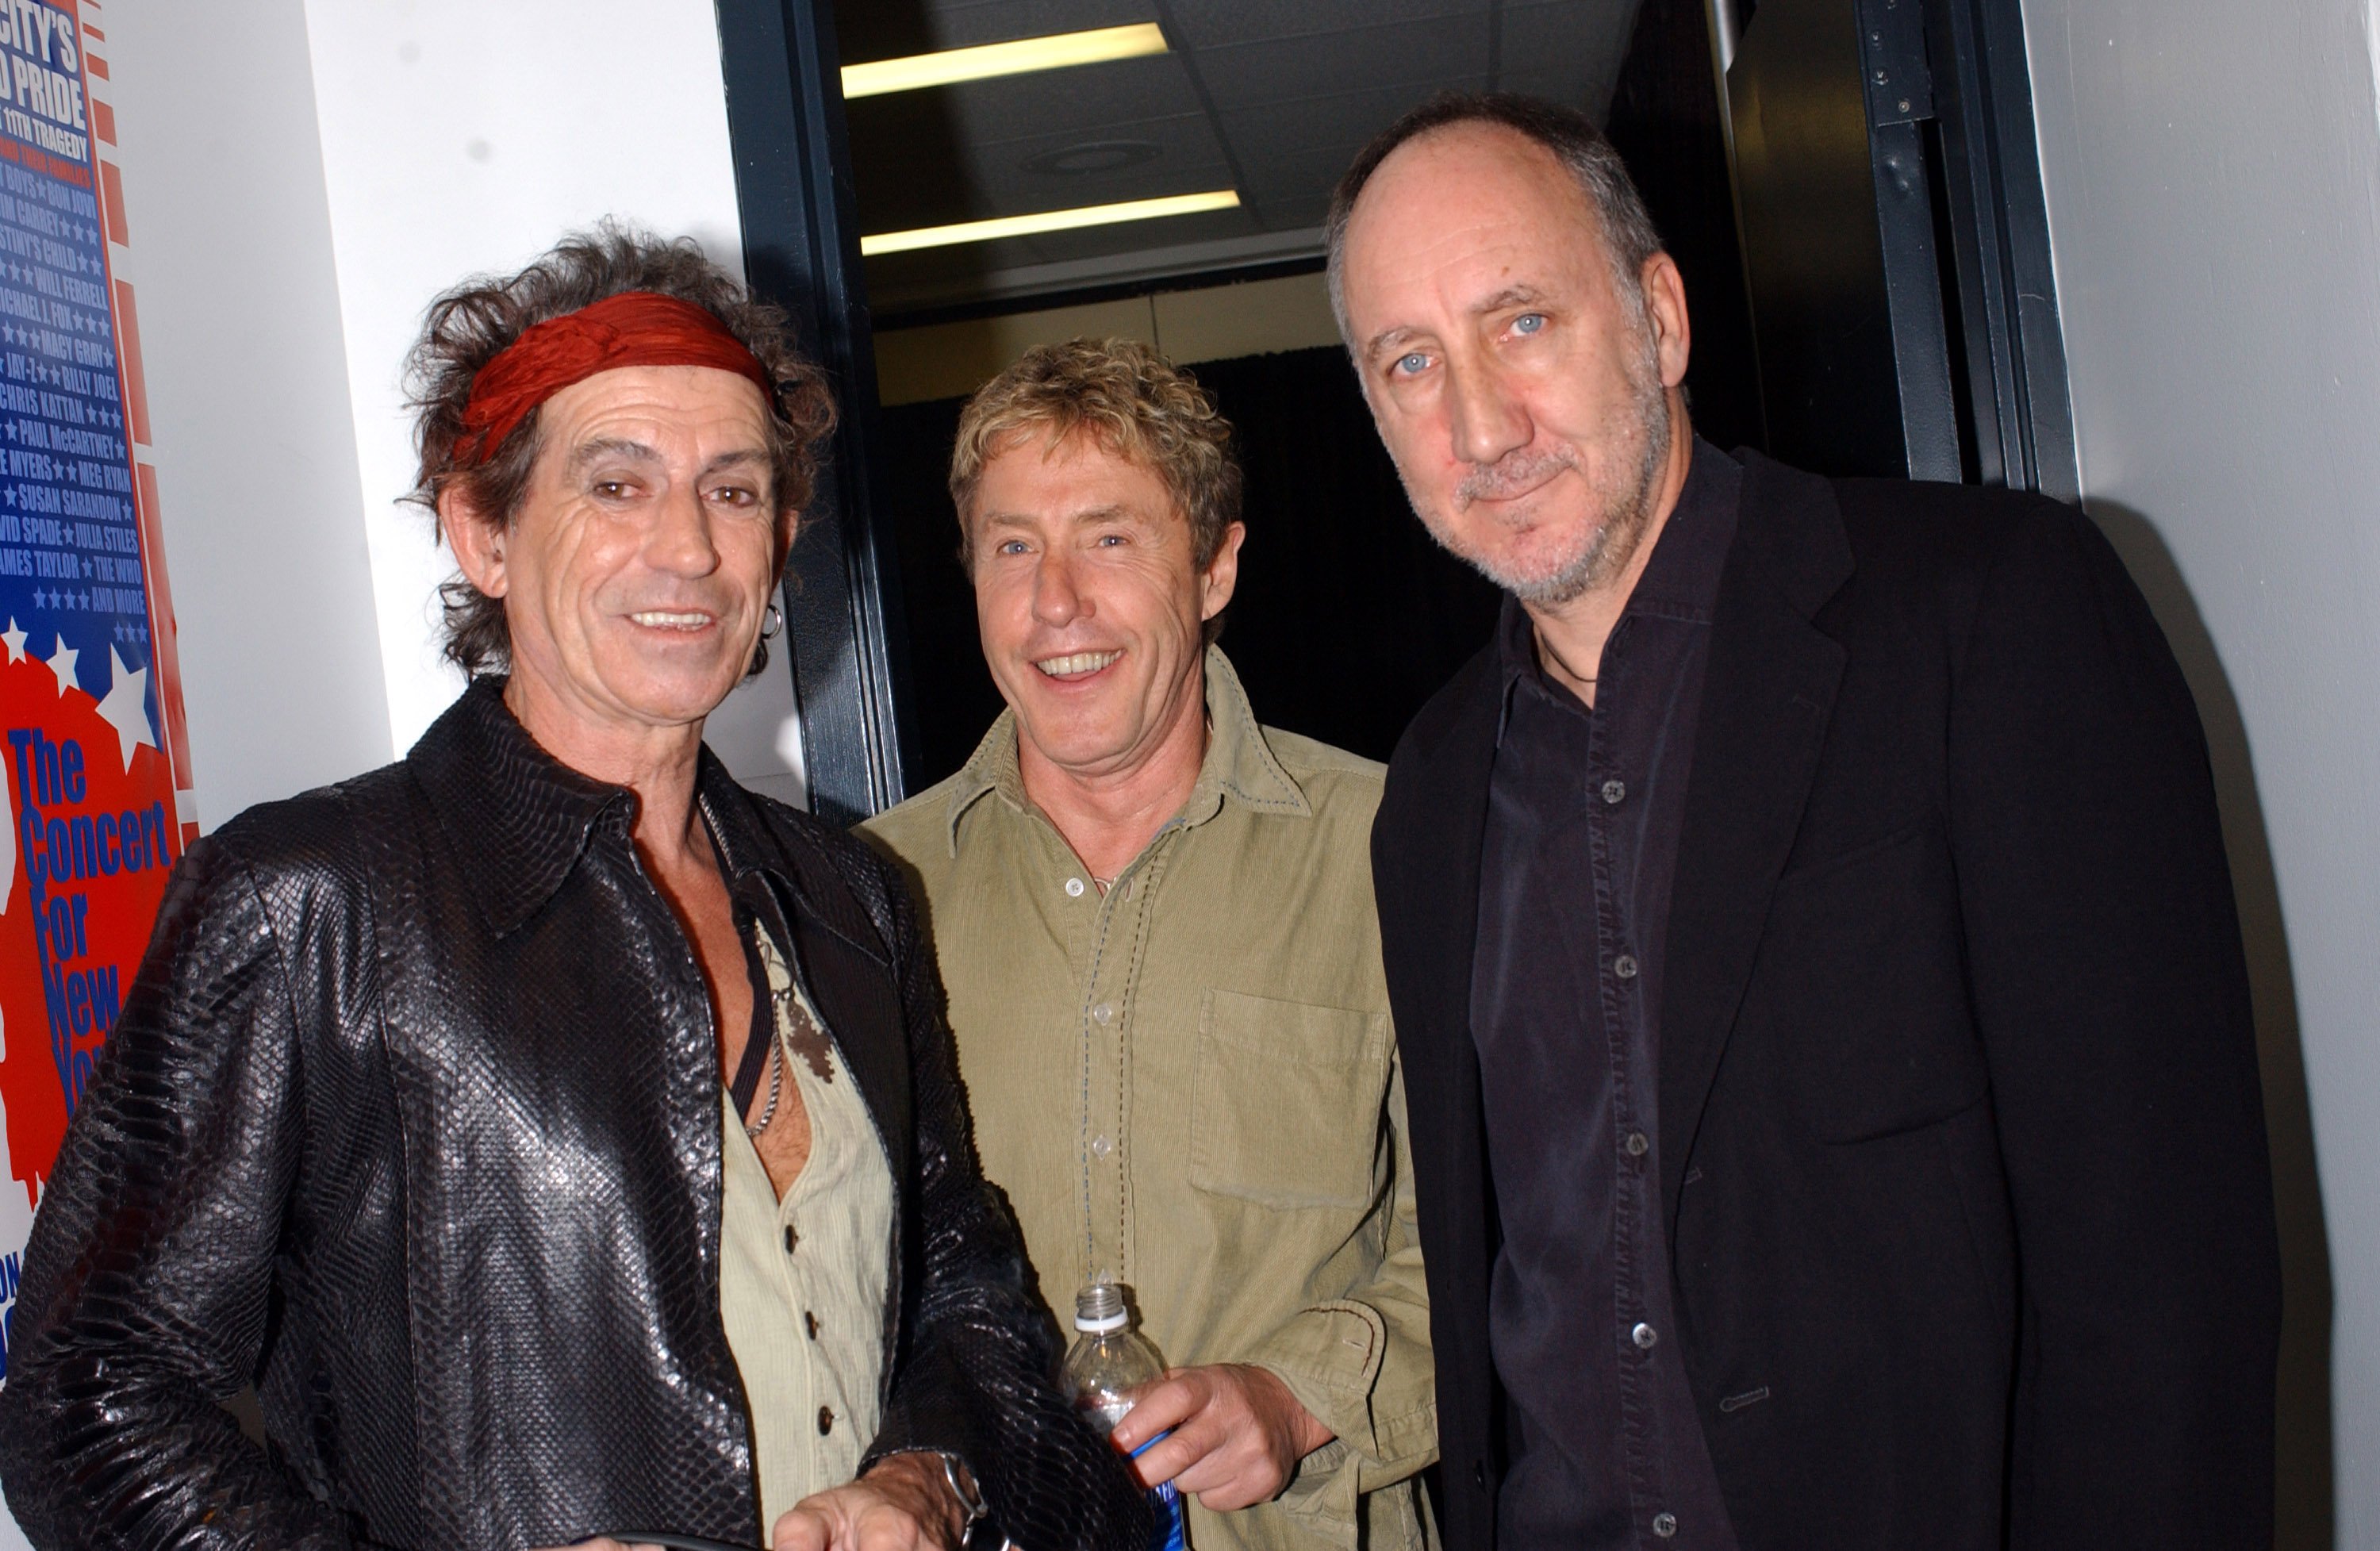 Keith Richards of The Rolling Stones backstage with Roger Daltrey and Pete Townshend of The Who